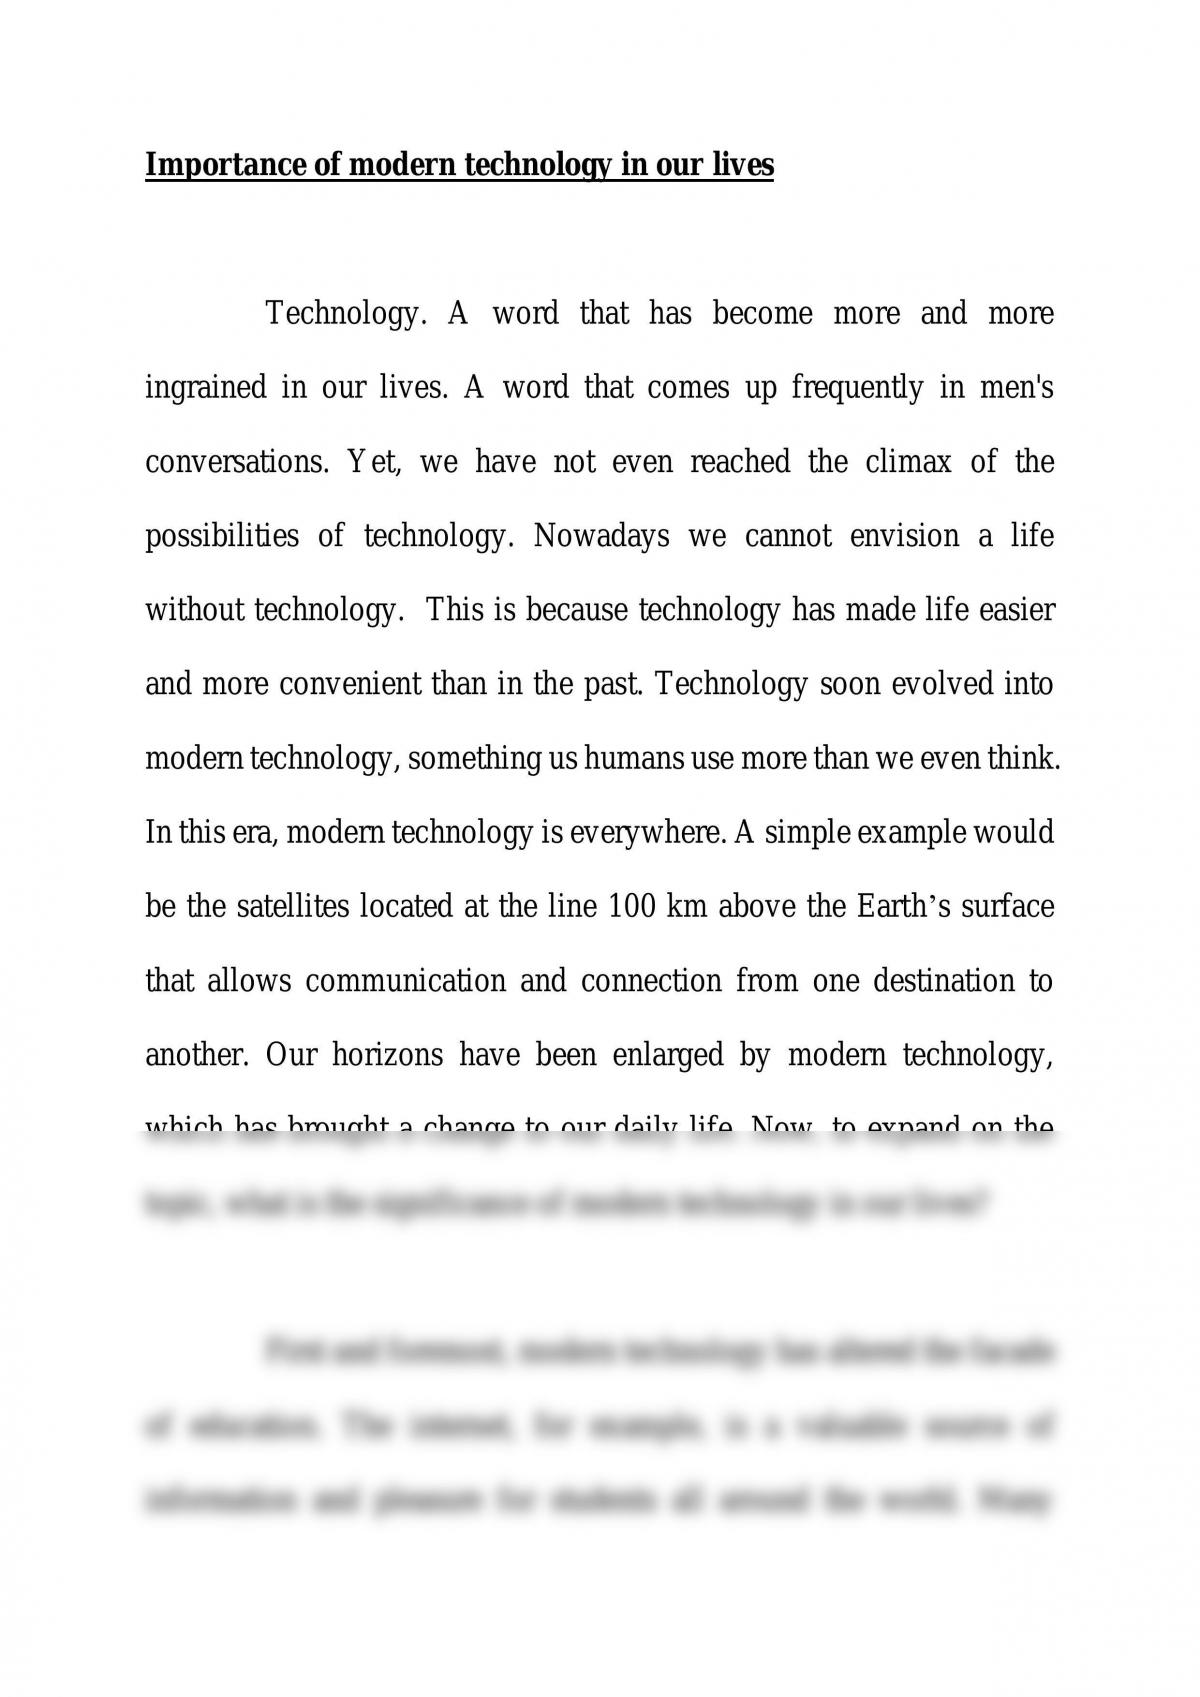 technology in our life essay